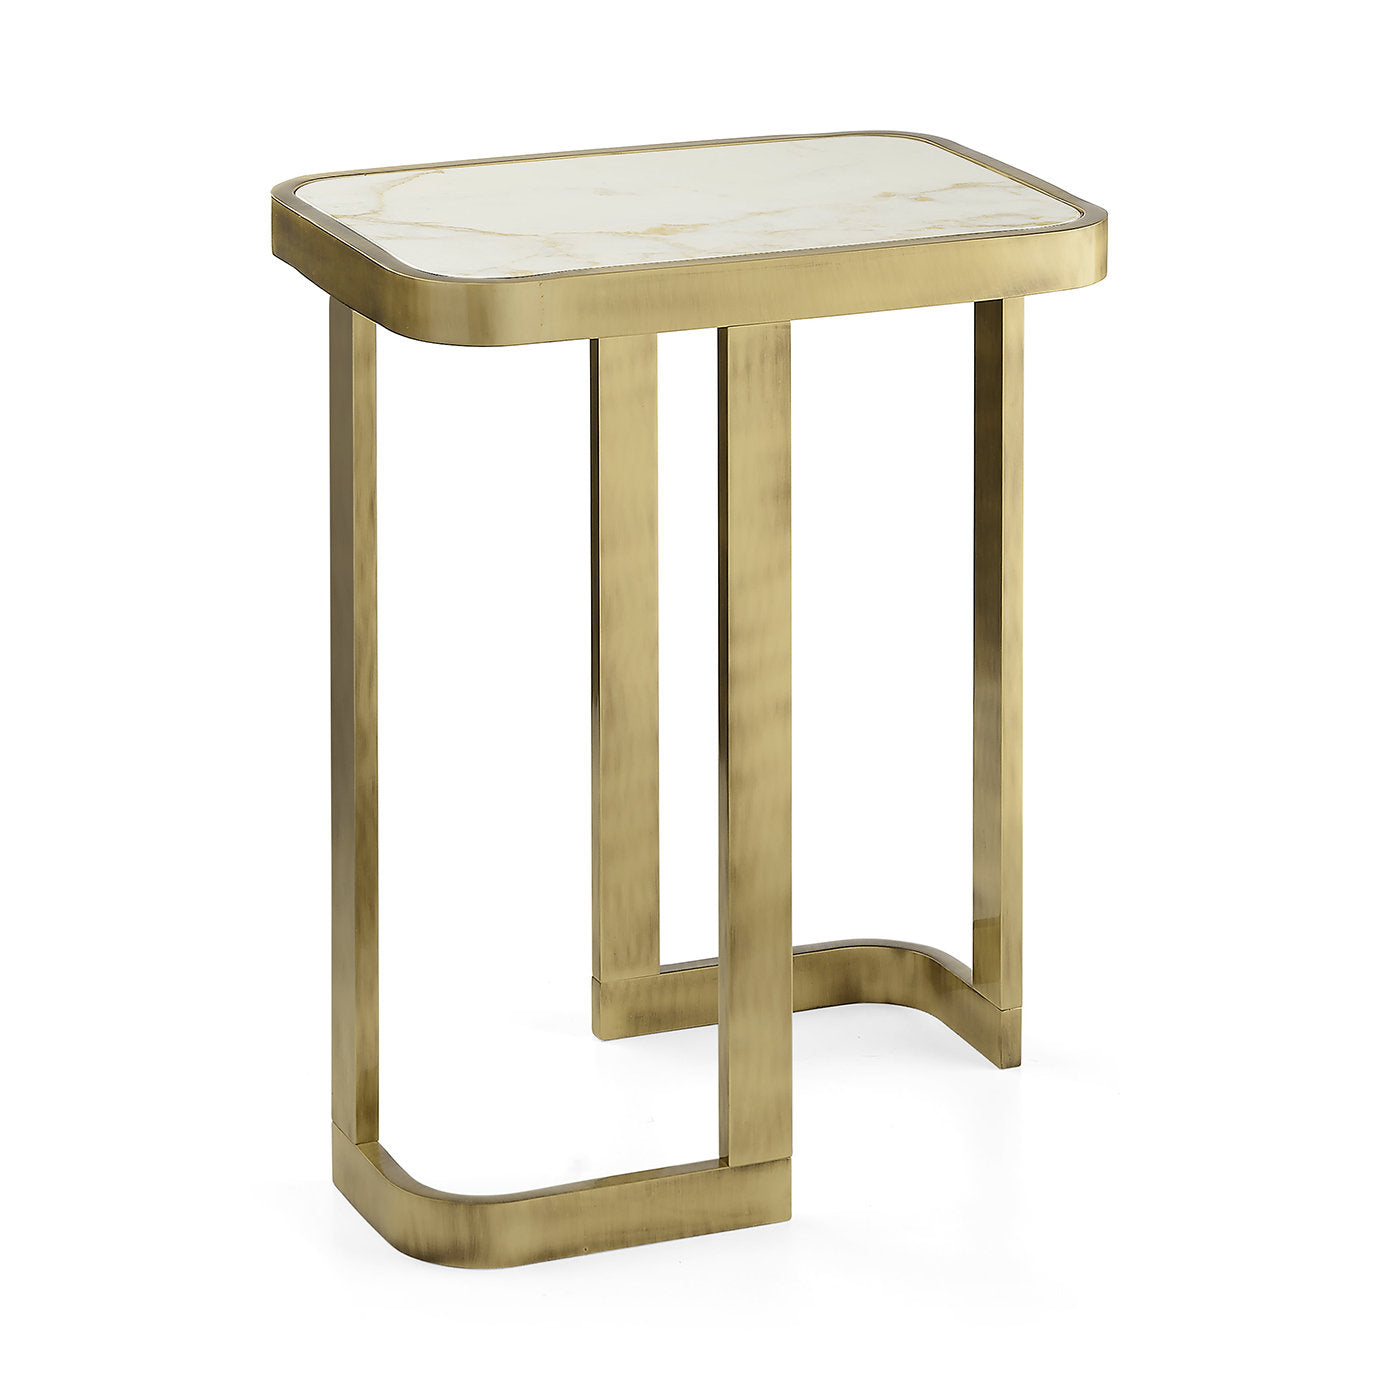 Jean Marble Side Table - Alternative view 4